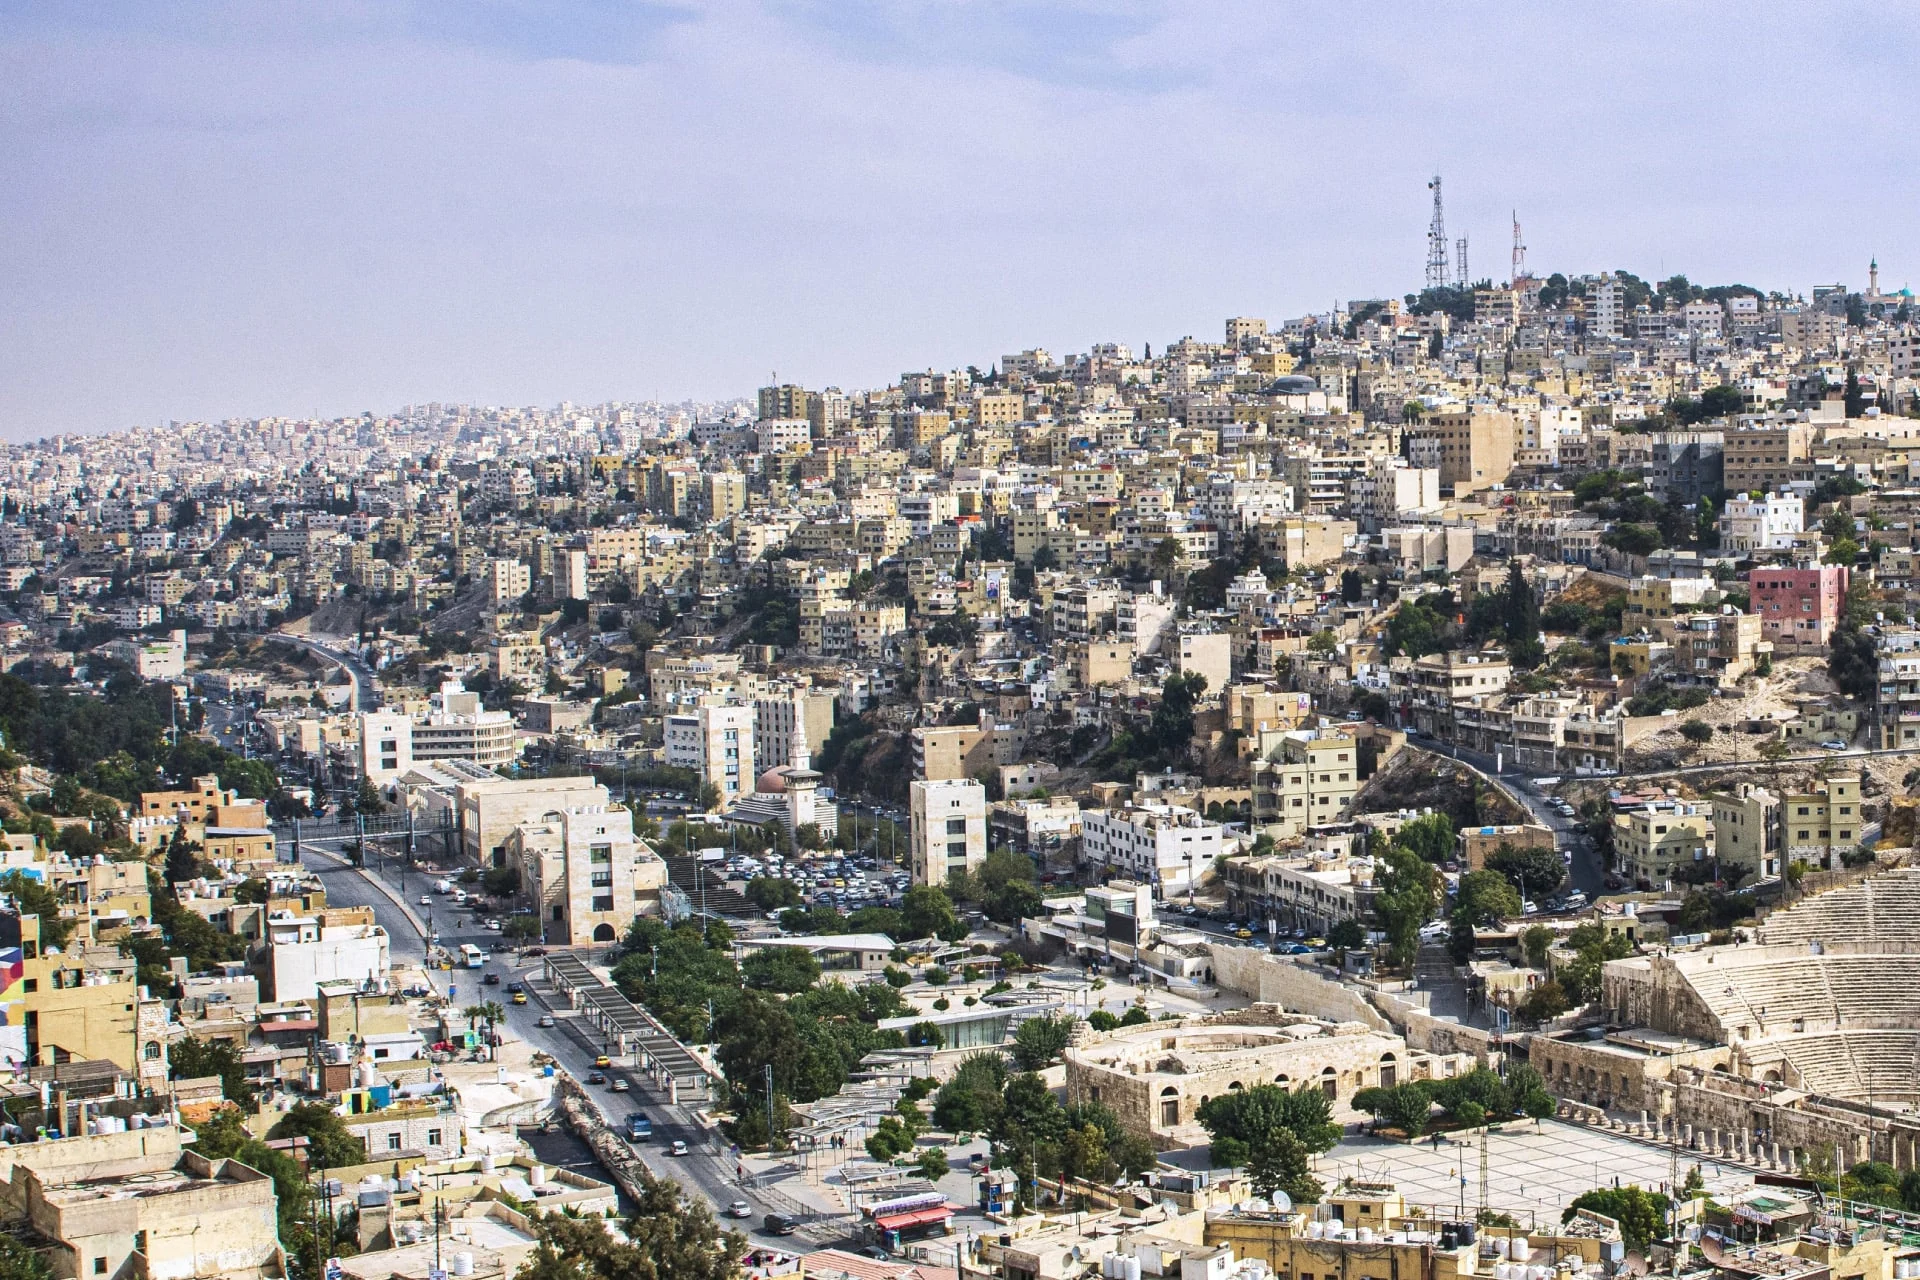 An aerial view of the city of amman, lebanon.